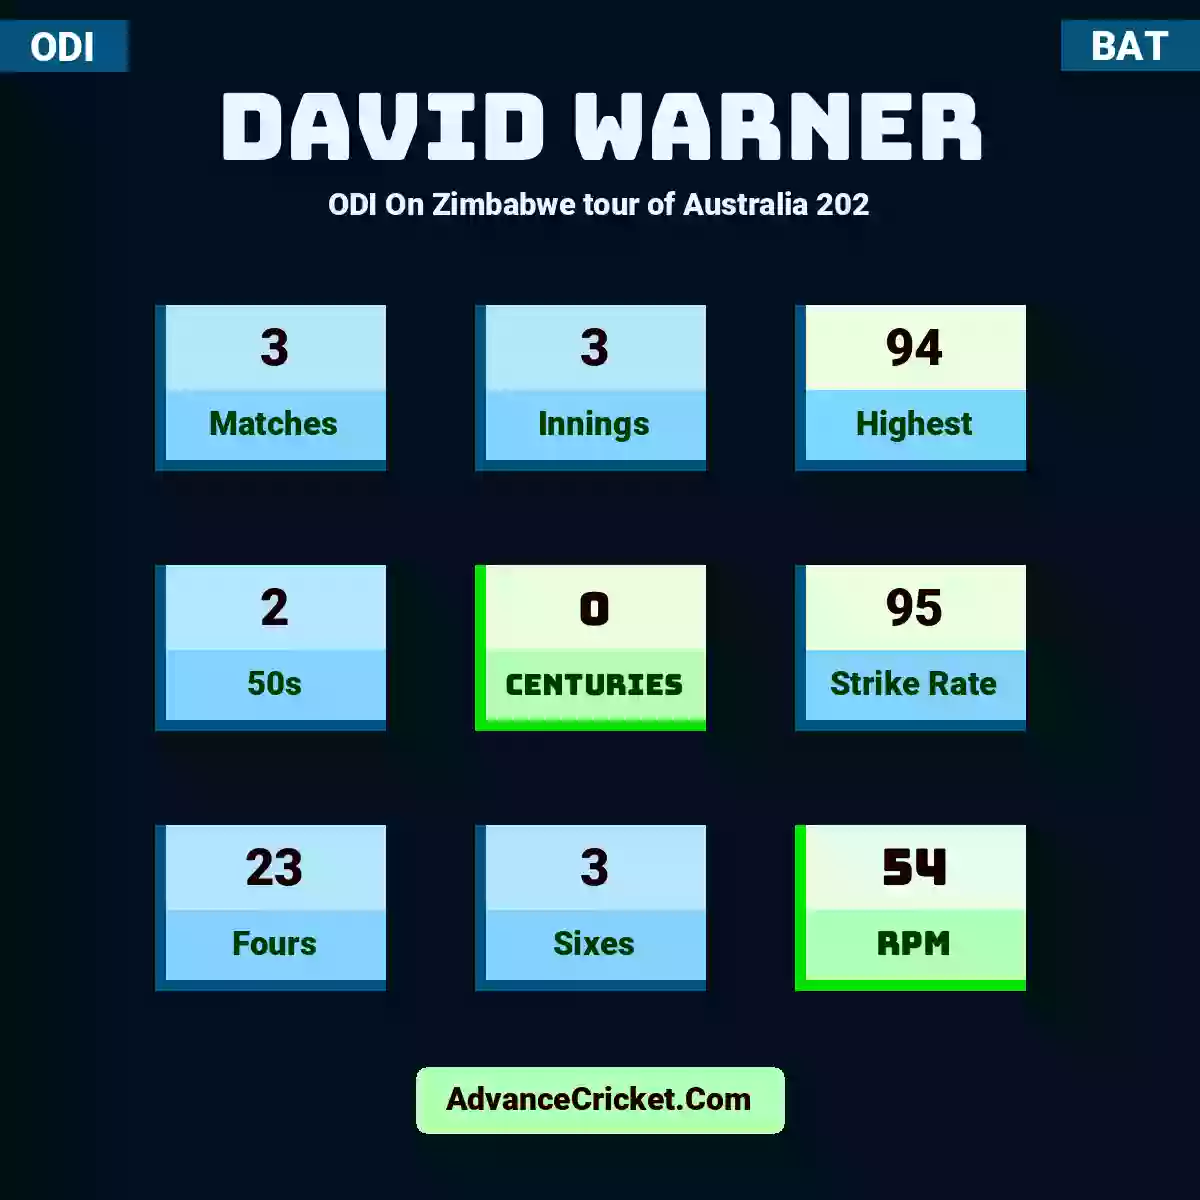 David Warner ODI  On Zimbabwe tour of Australia 202, David Warner played 3 matches, scored 94 runs as highest, 2 half-centuries, and 0 centuries, with a strike rate of 95. D.Warner hit 23 fours and 3 sixes, with an RPM of 54.